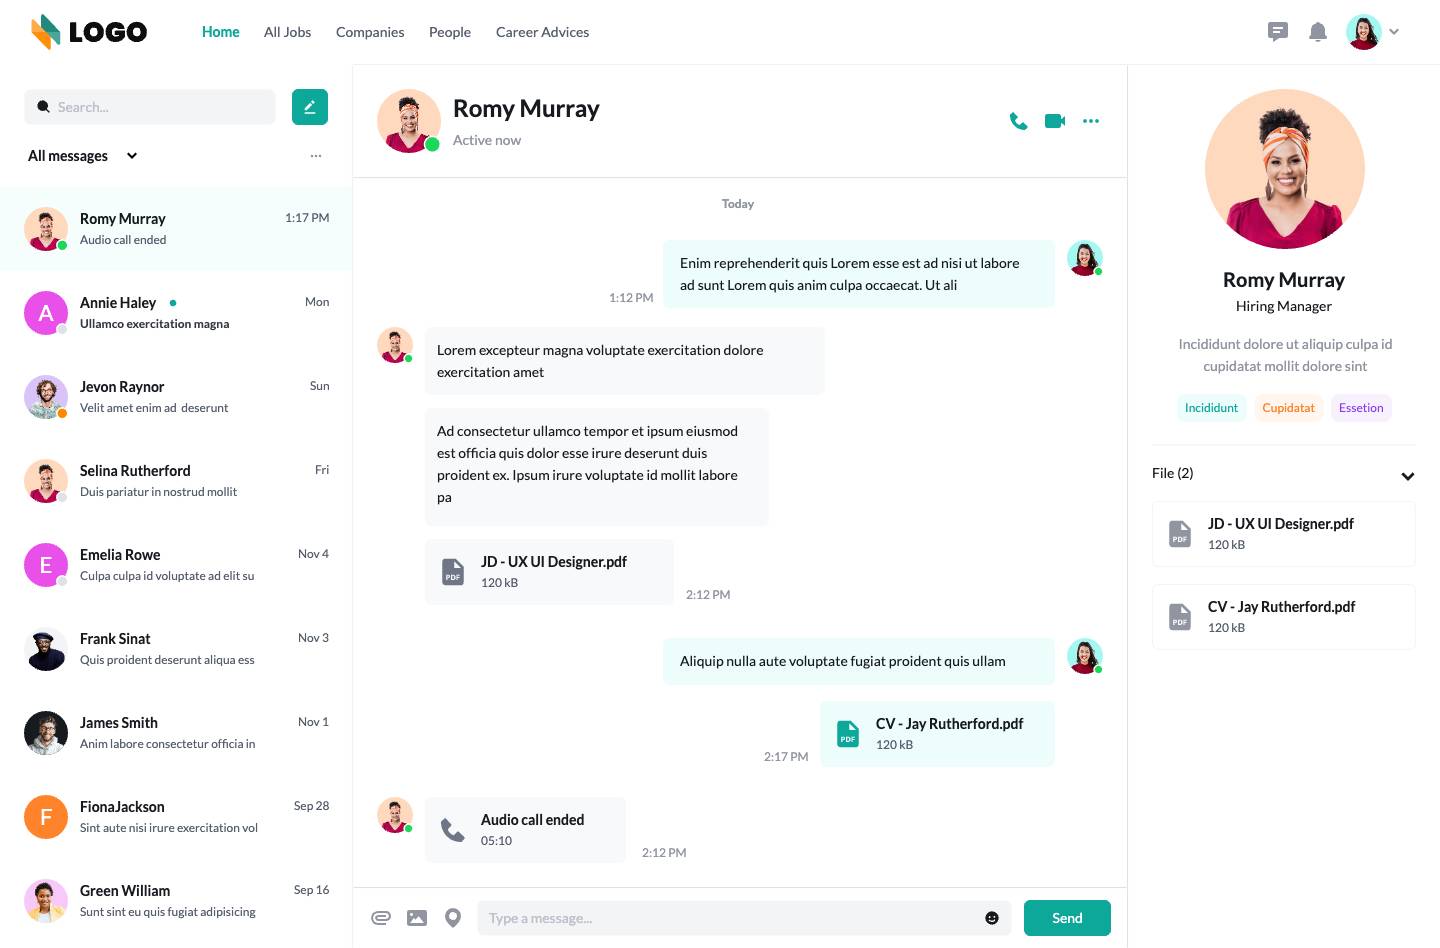 Inbox - Chat with recruiter